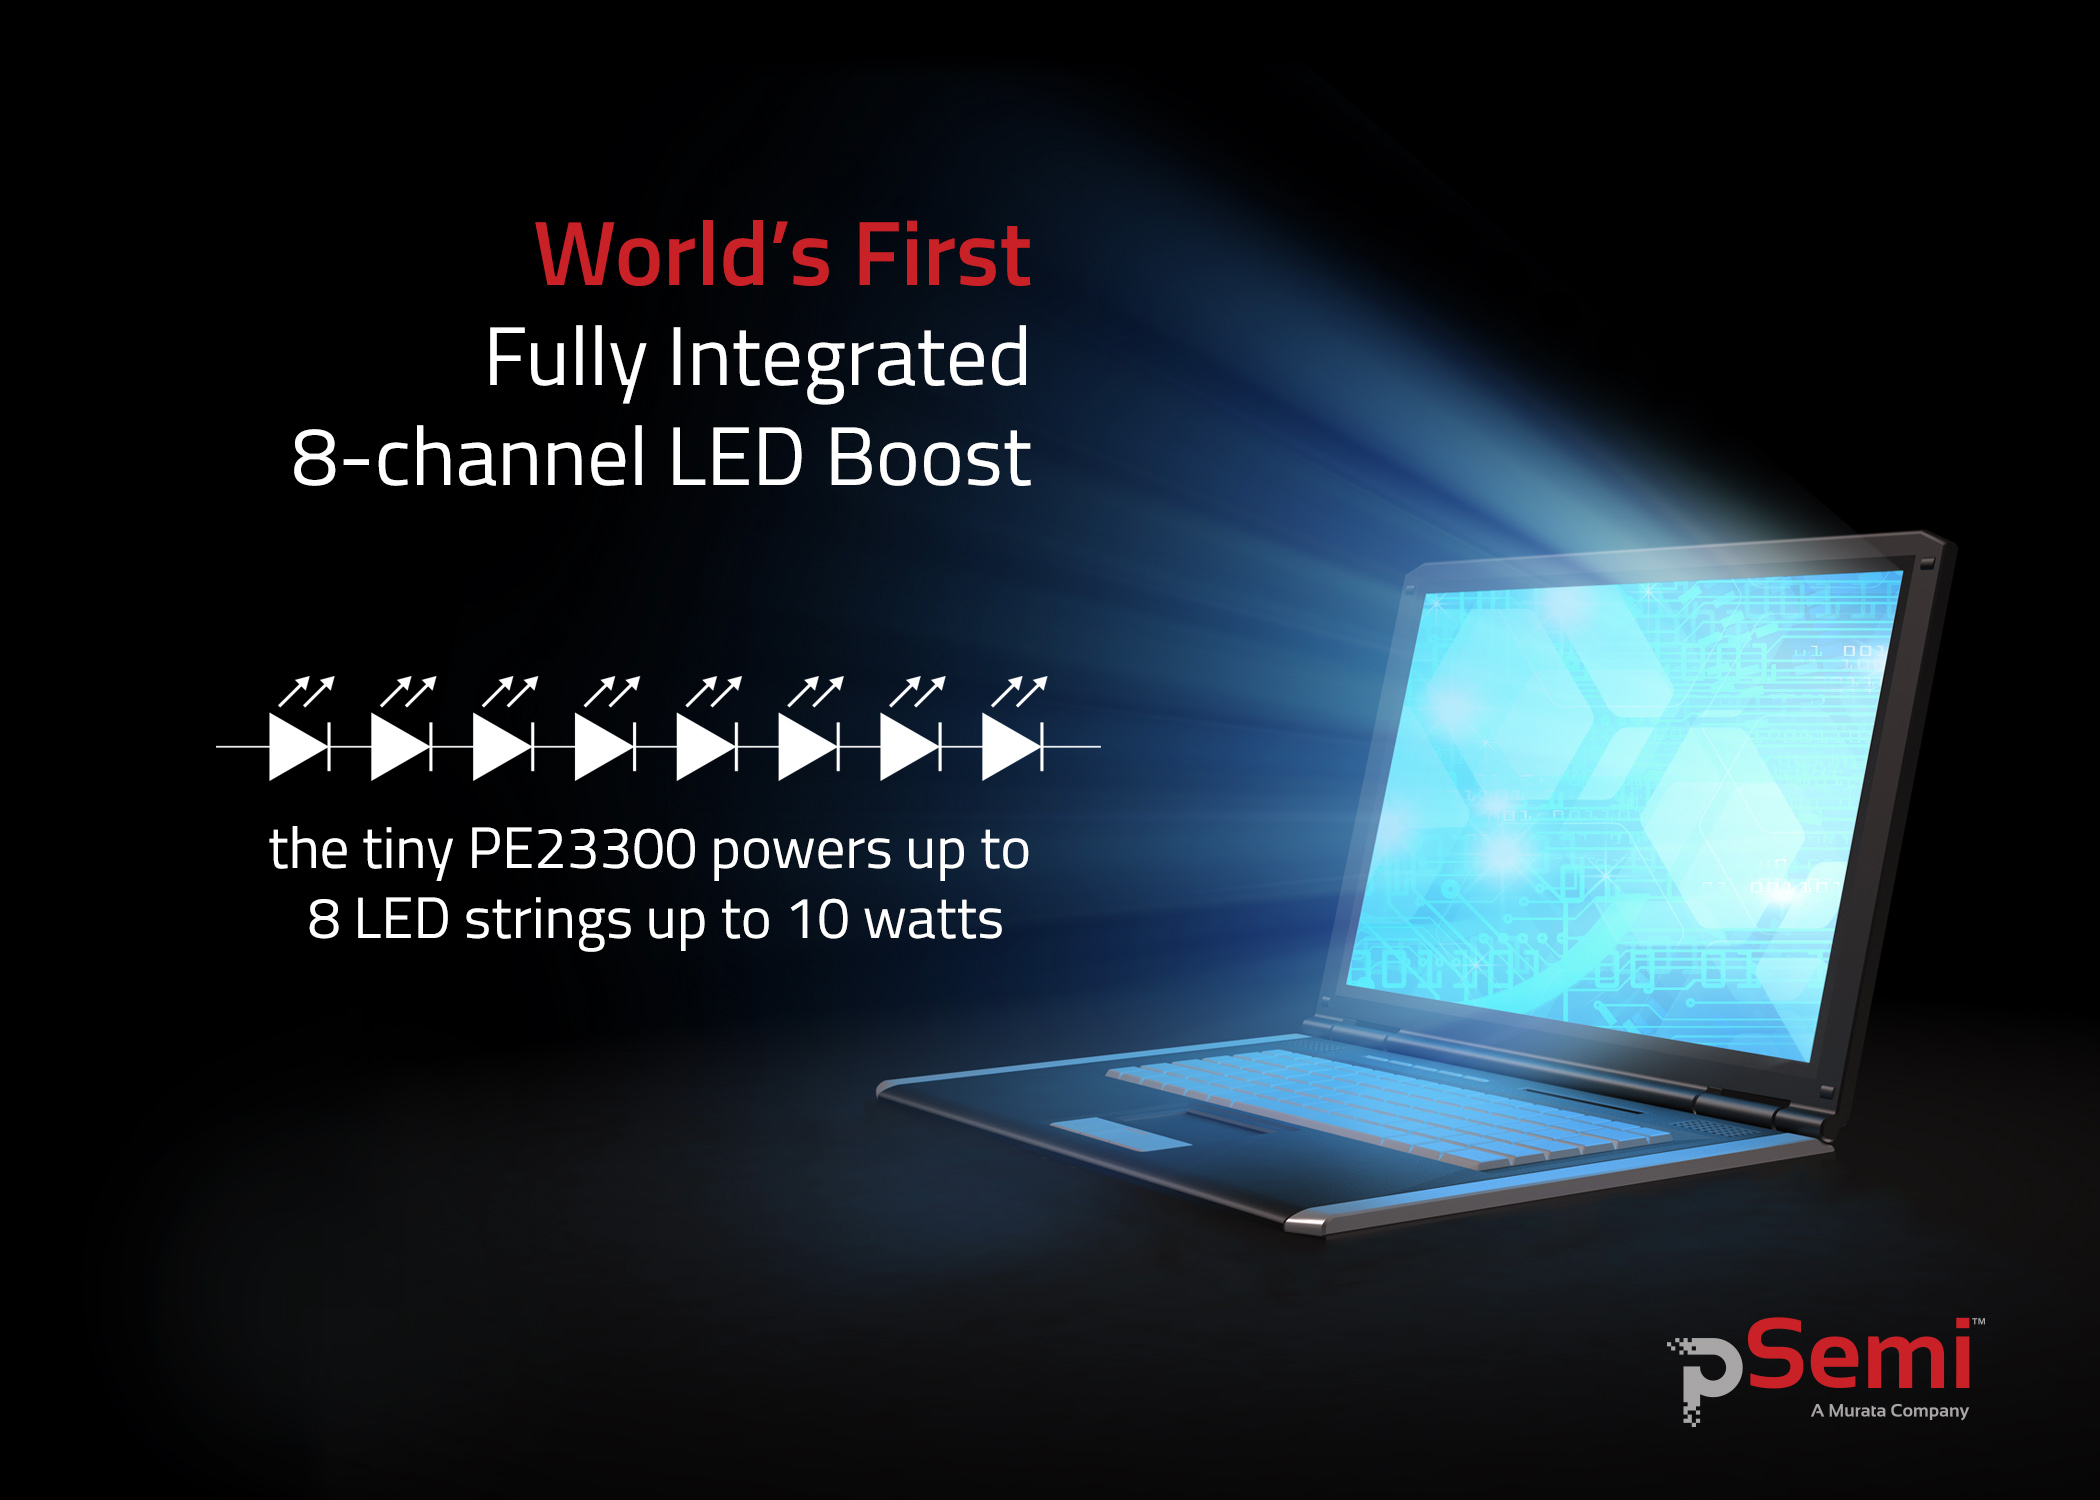 The World's First, Fully Integrated, 8-channel LED Boost Power Supply